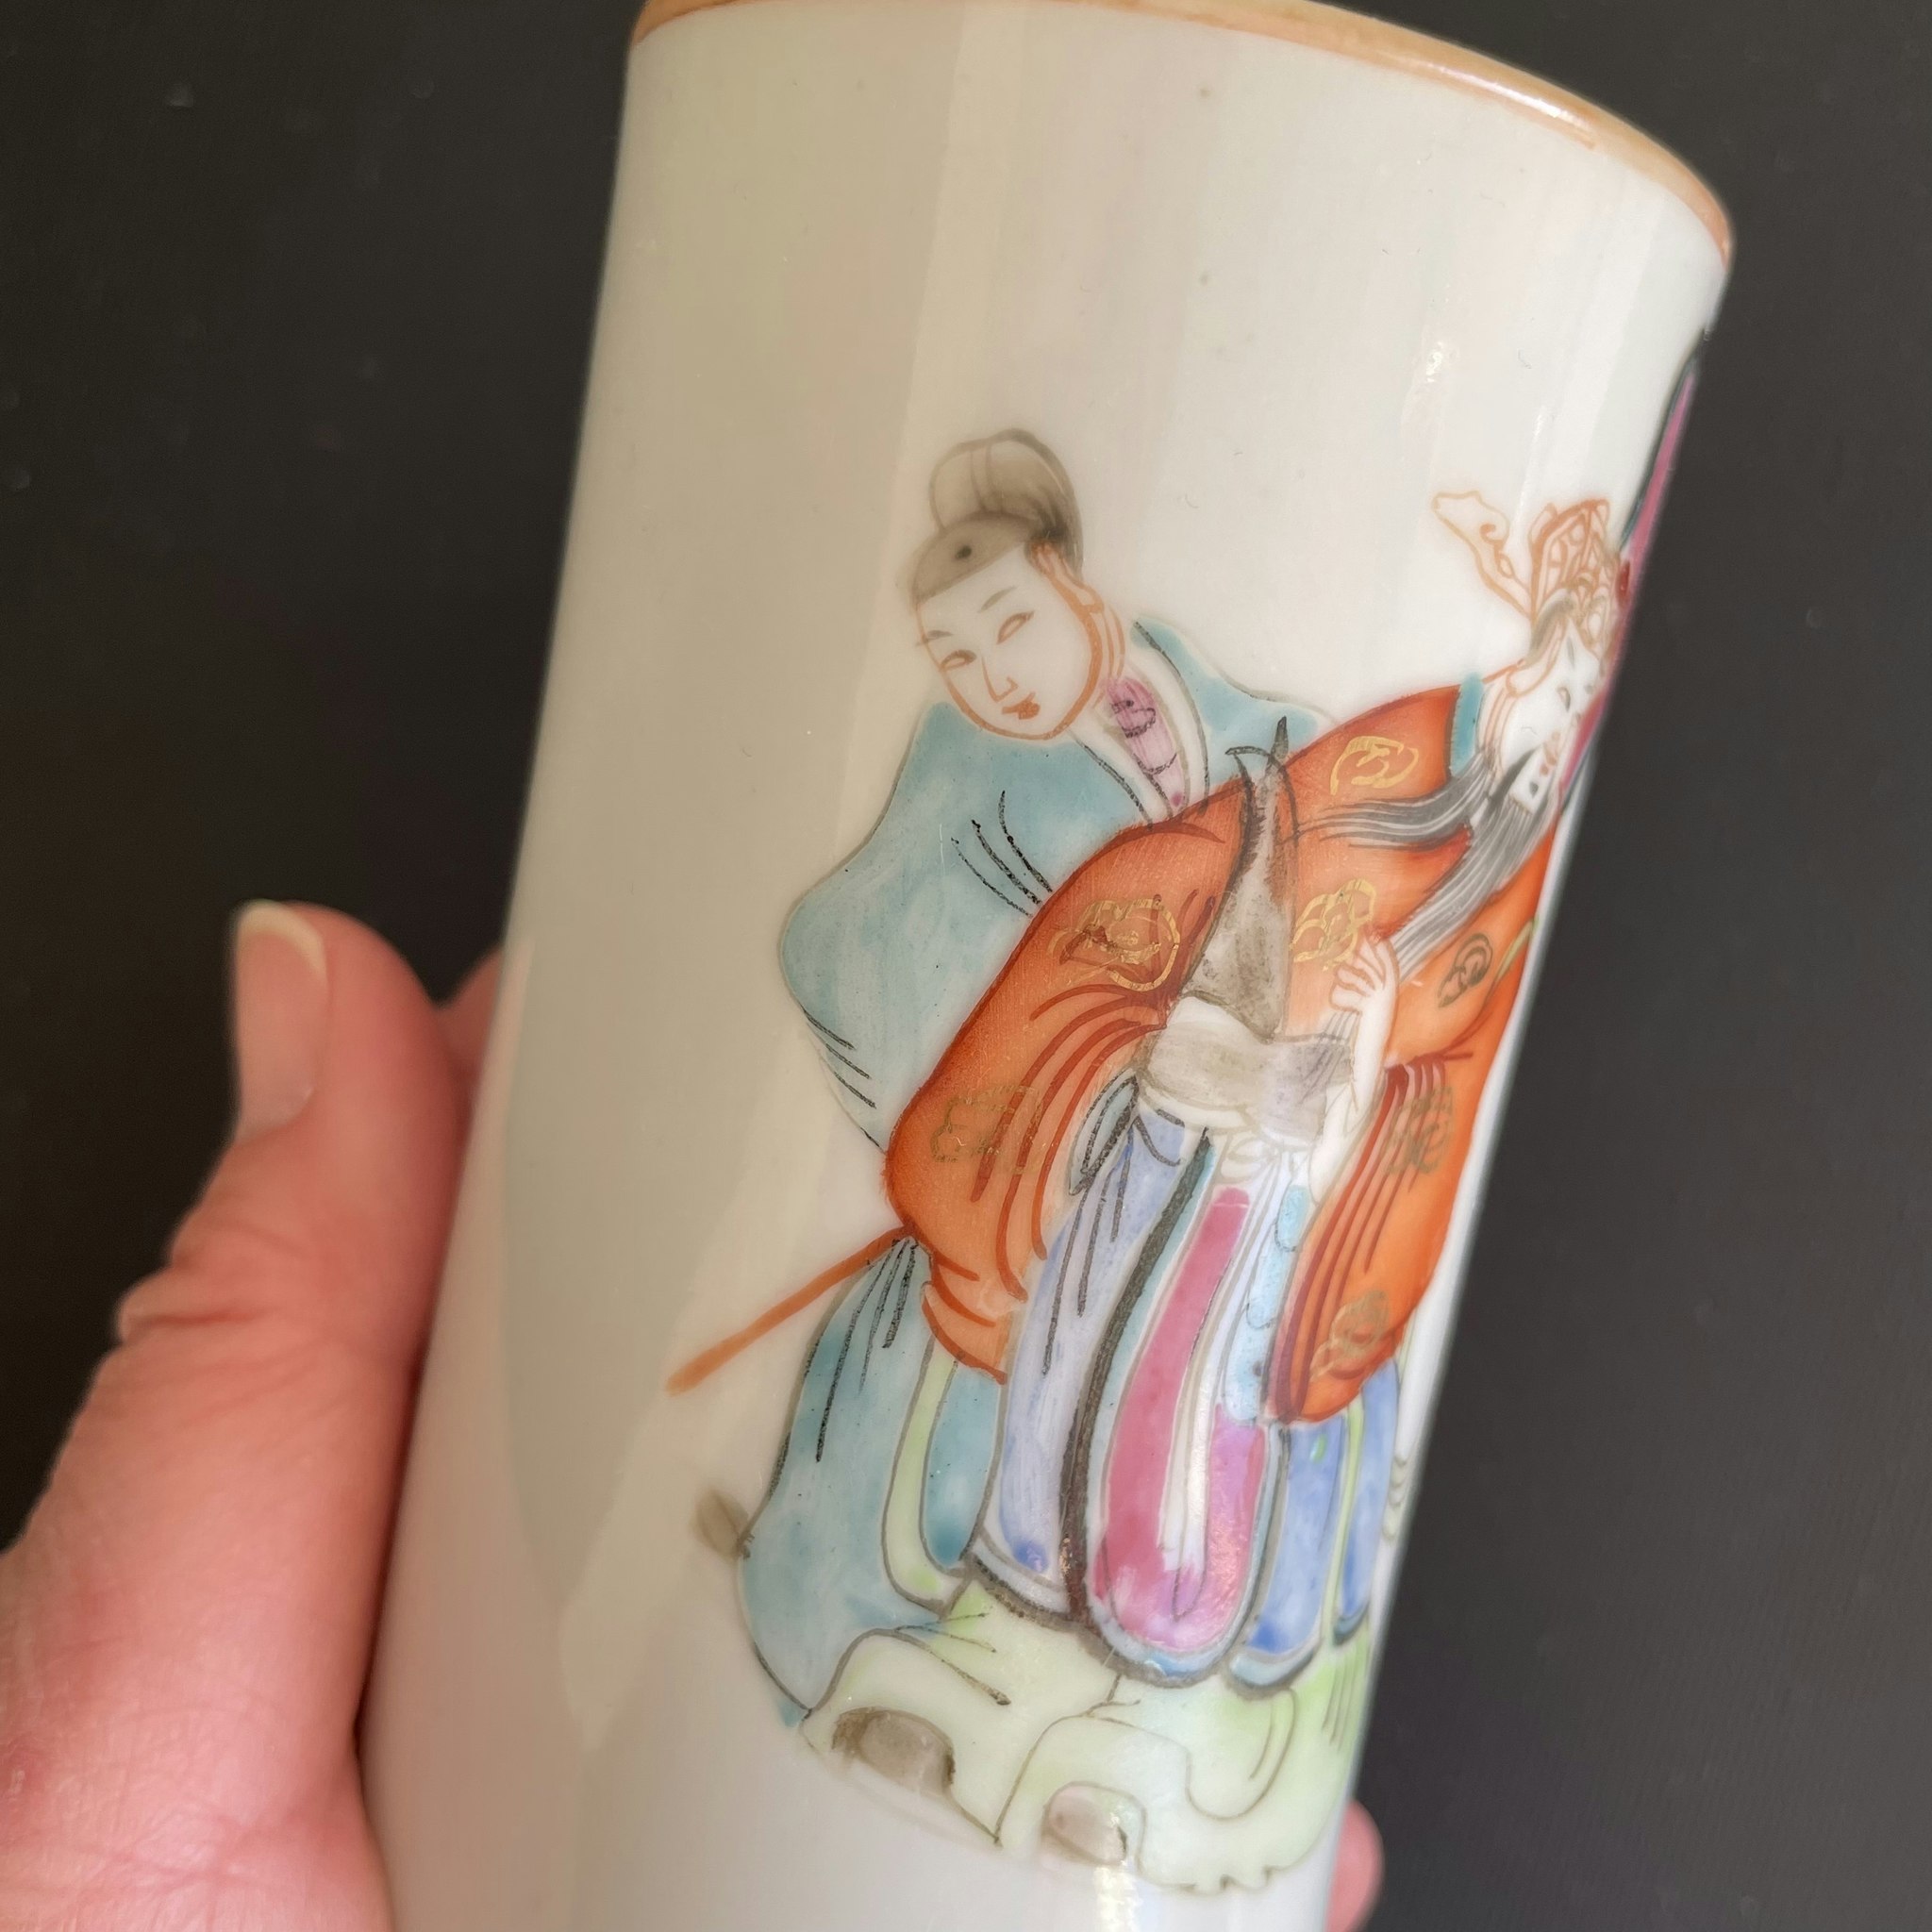 Chinese Antique Pencil Vase 19th century, Scholars Object #1782